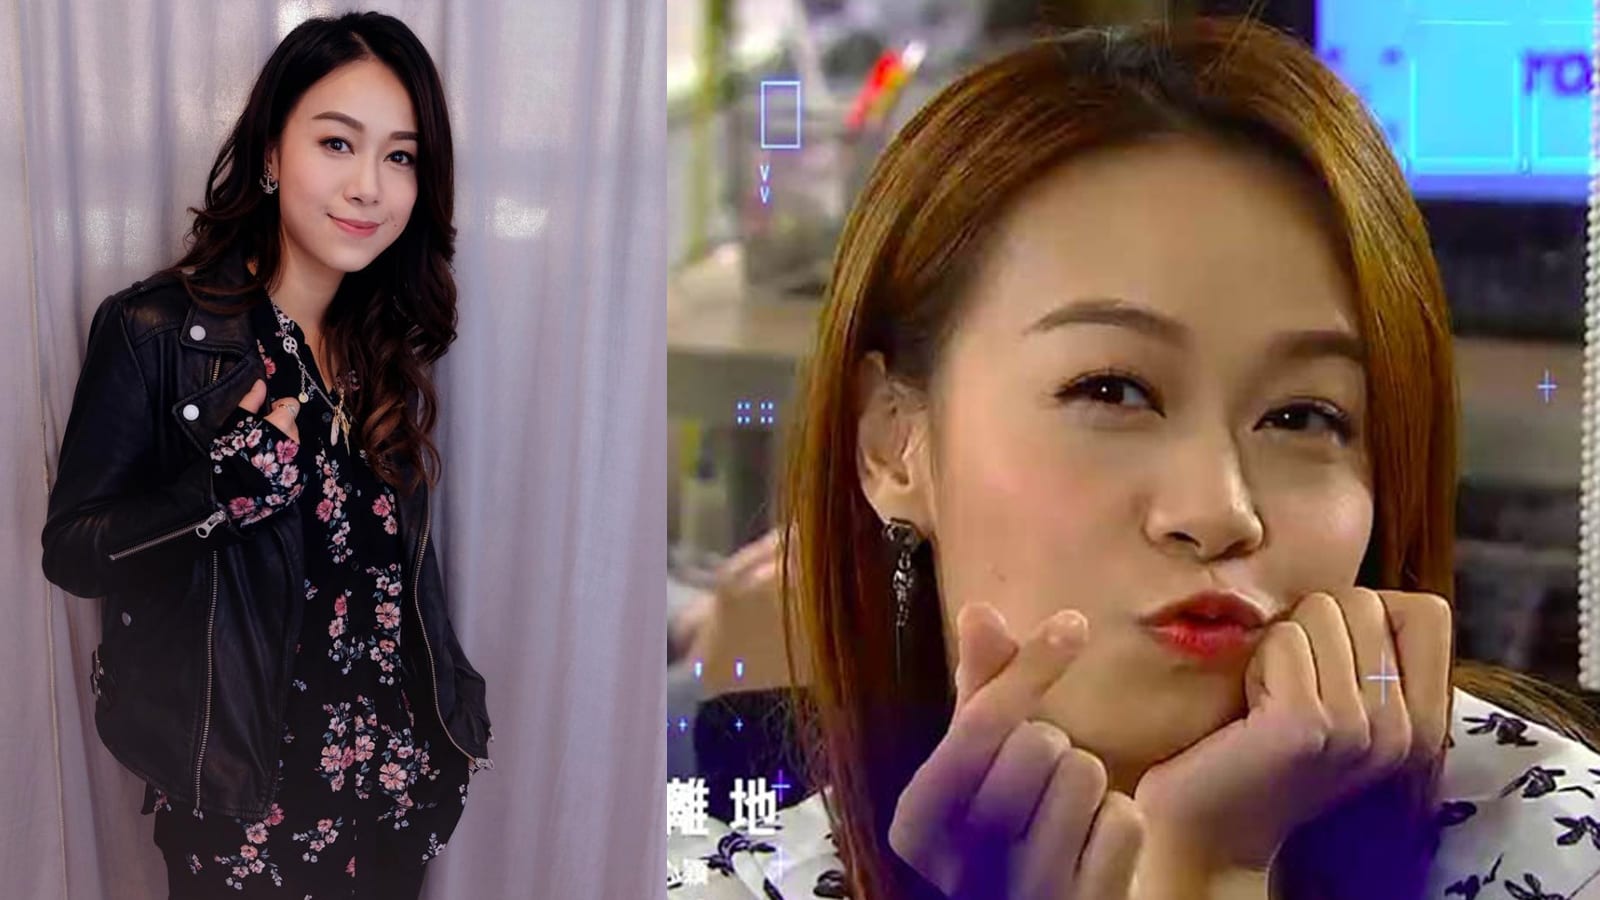 TVB Has Lifted Its Unofficial Ban On Jacqueline Wong And Netizens Are Not Happy About It